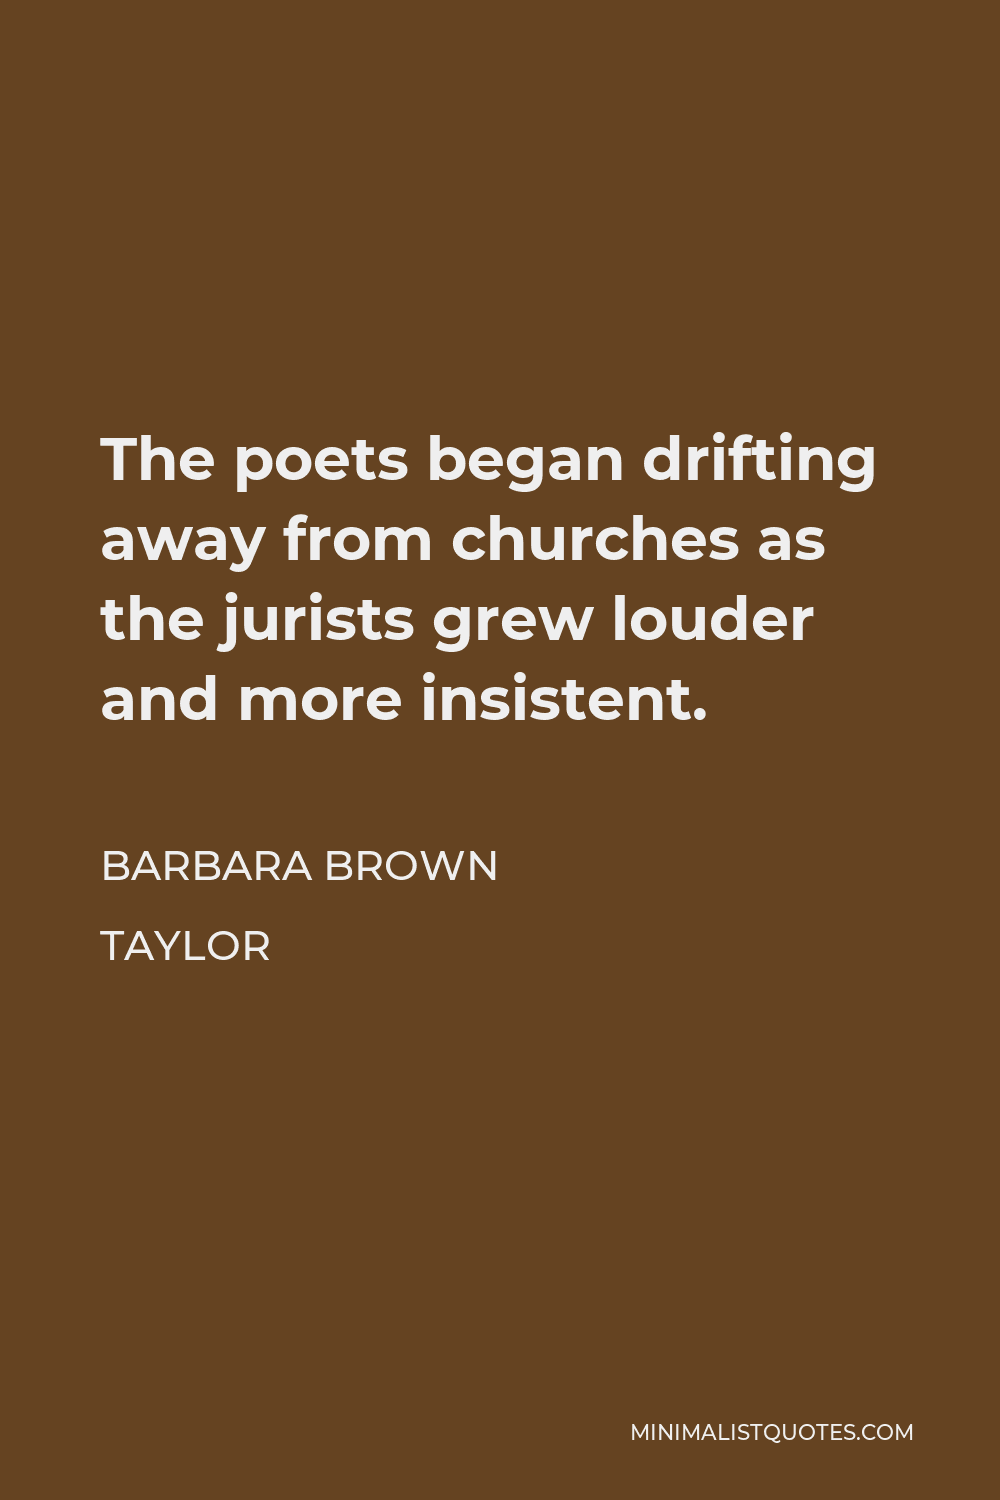 Barbara Brown Taylor Quote - The poets began drifting away from churches as the jurists grew louder and more insistent.